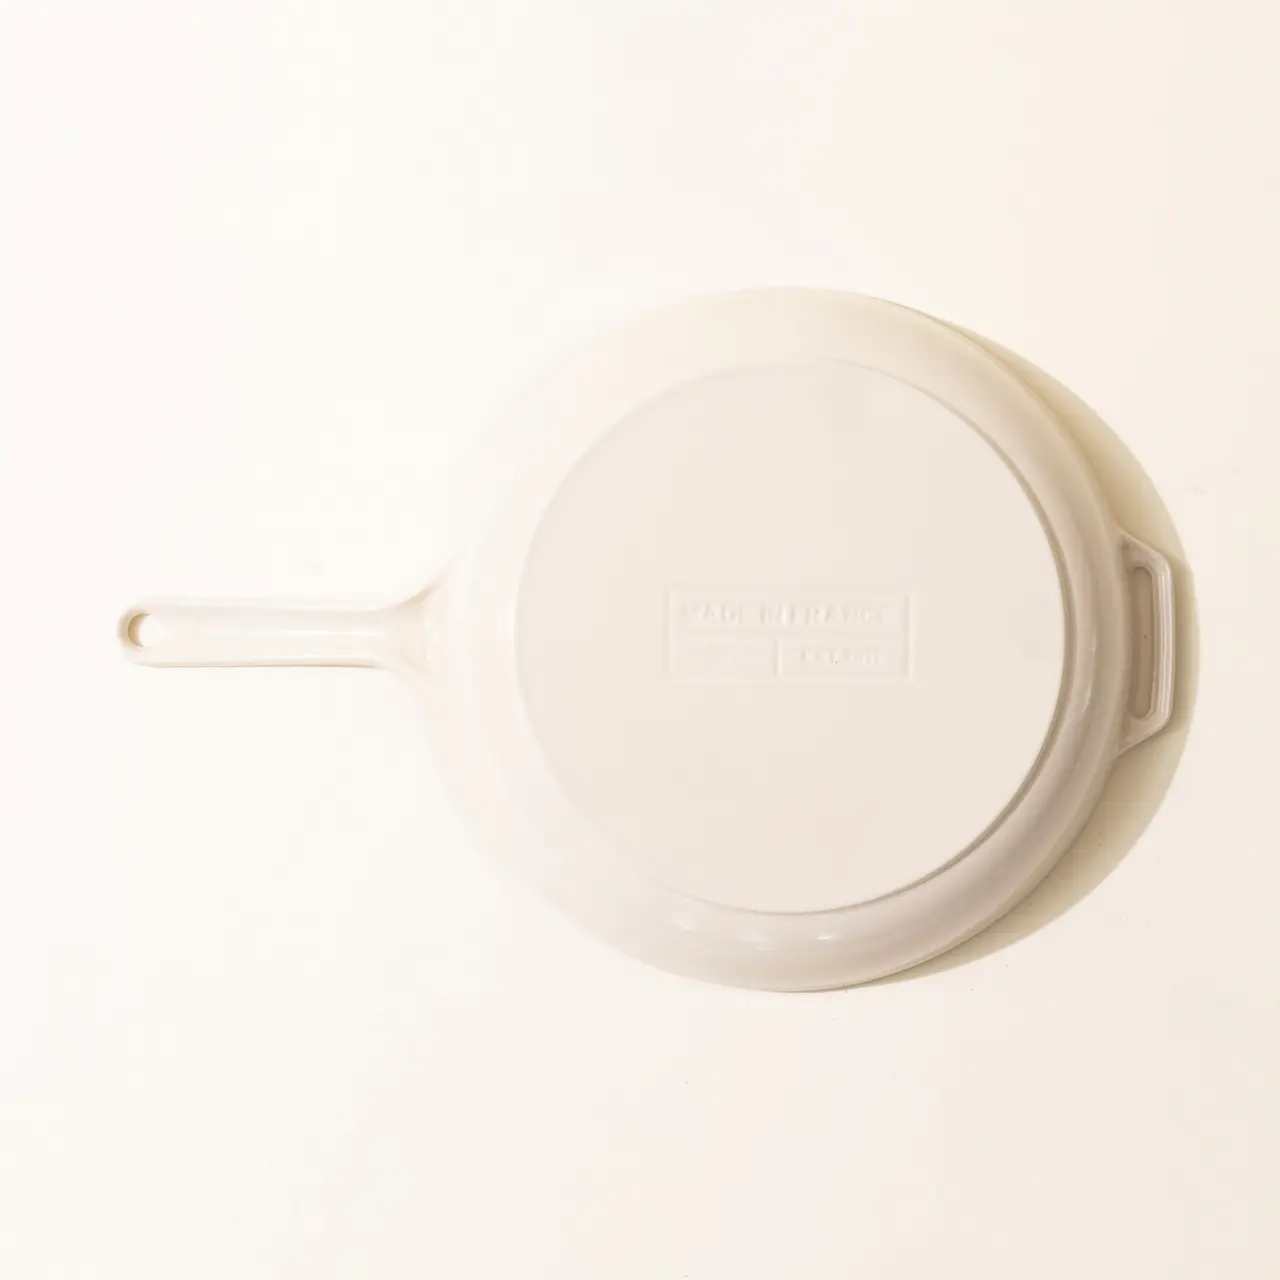 A white, ceramic skillet with a handle lies top-down on a light surface, displaying a text logo on its bottom.